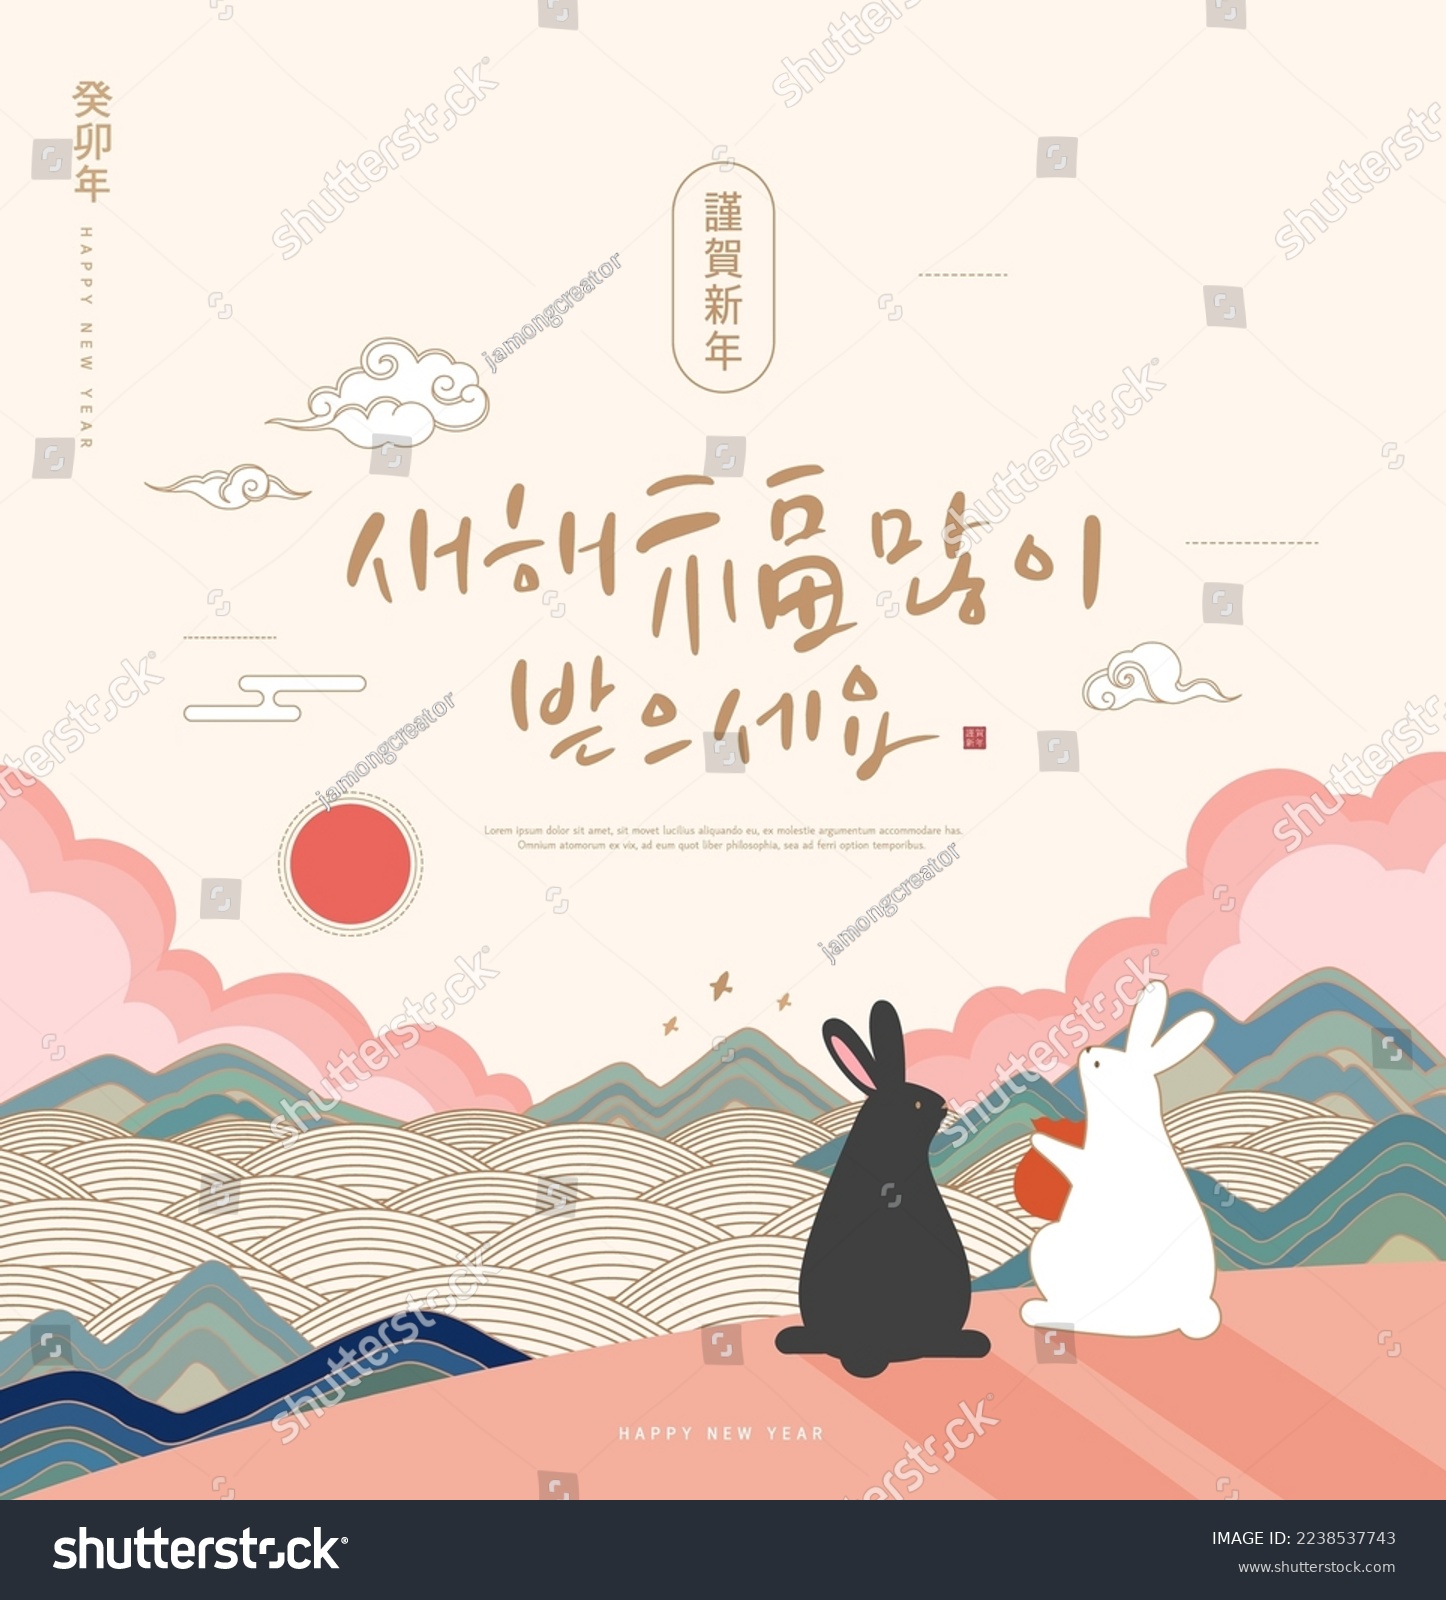 Korea Lunar New Year. New Year's Day greeting. Text Translation "rabbit year" , "happy new year"
 #2238537743